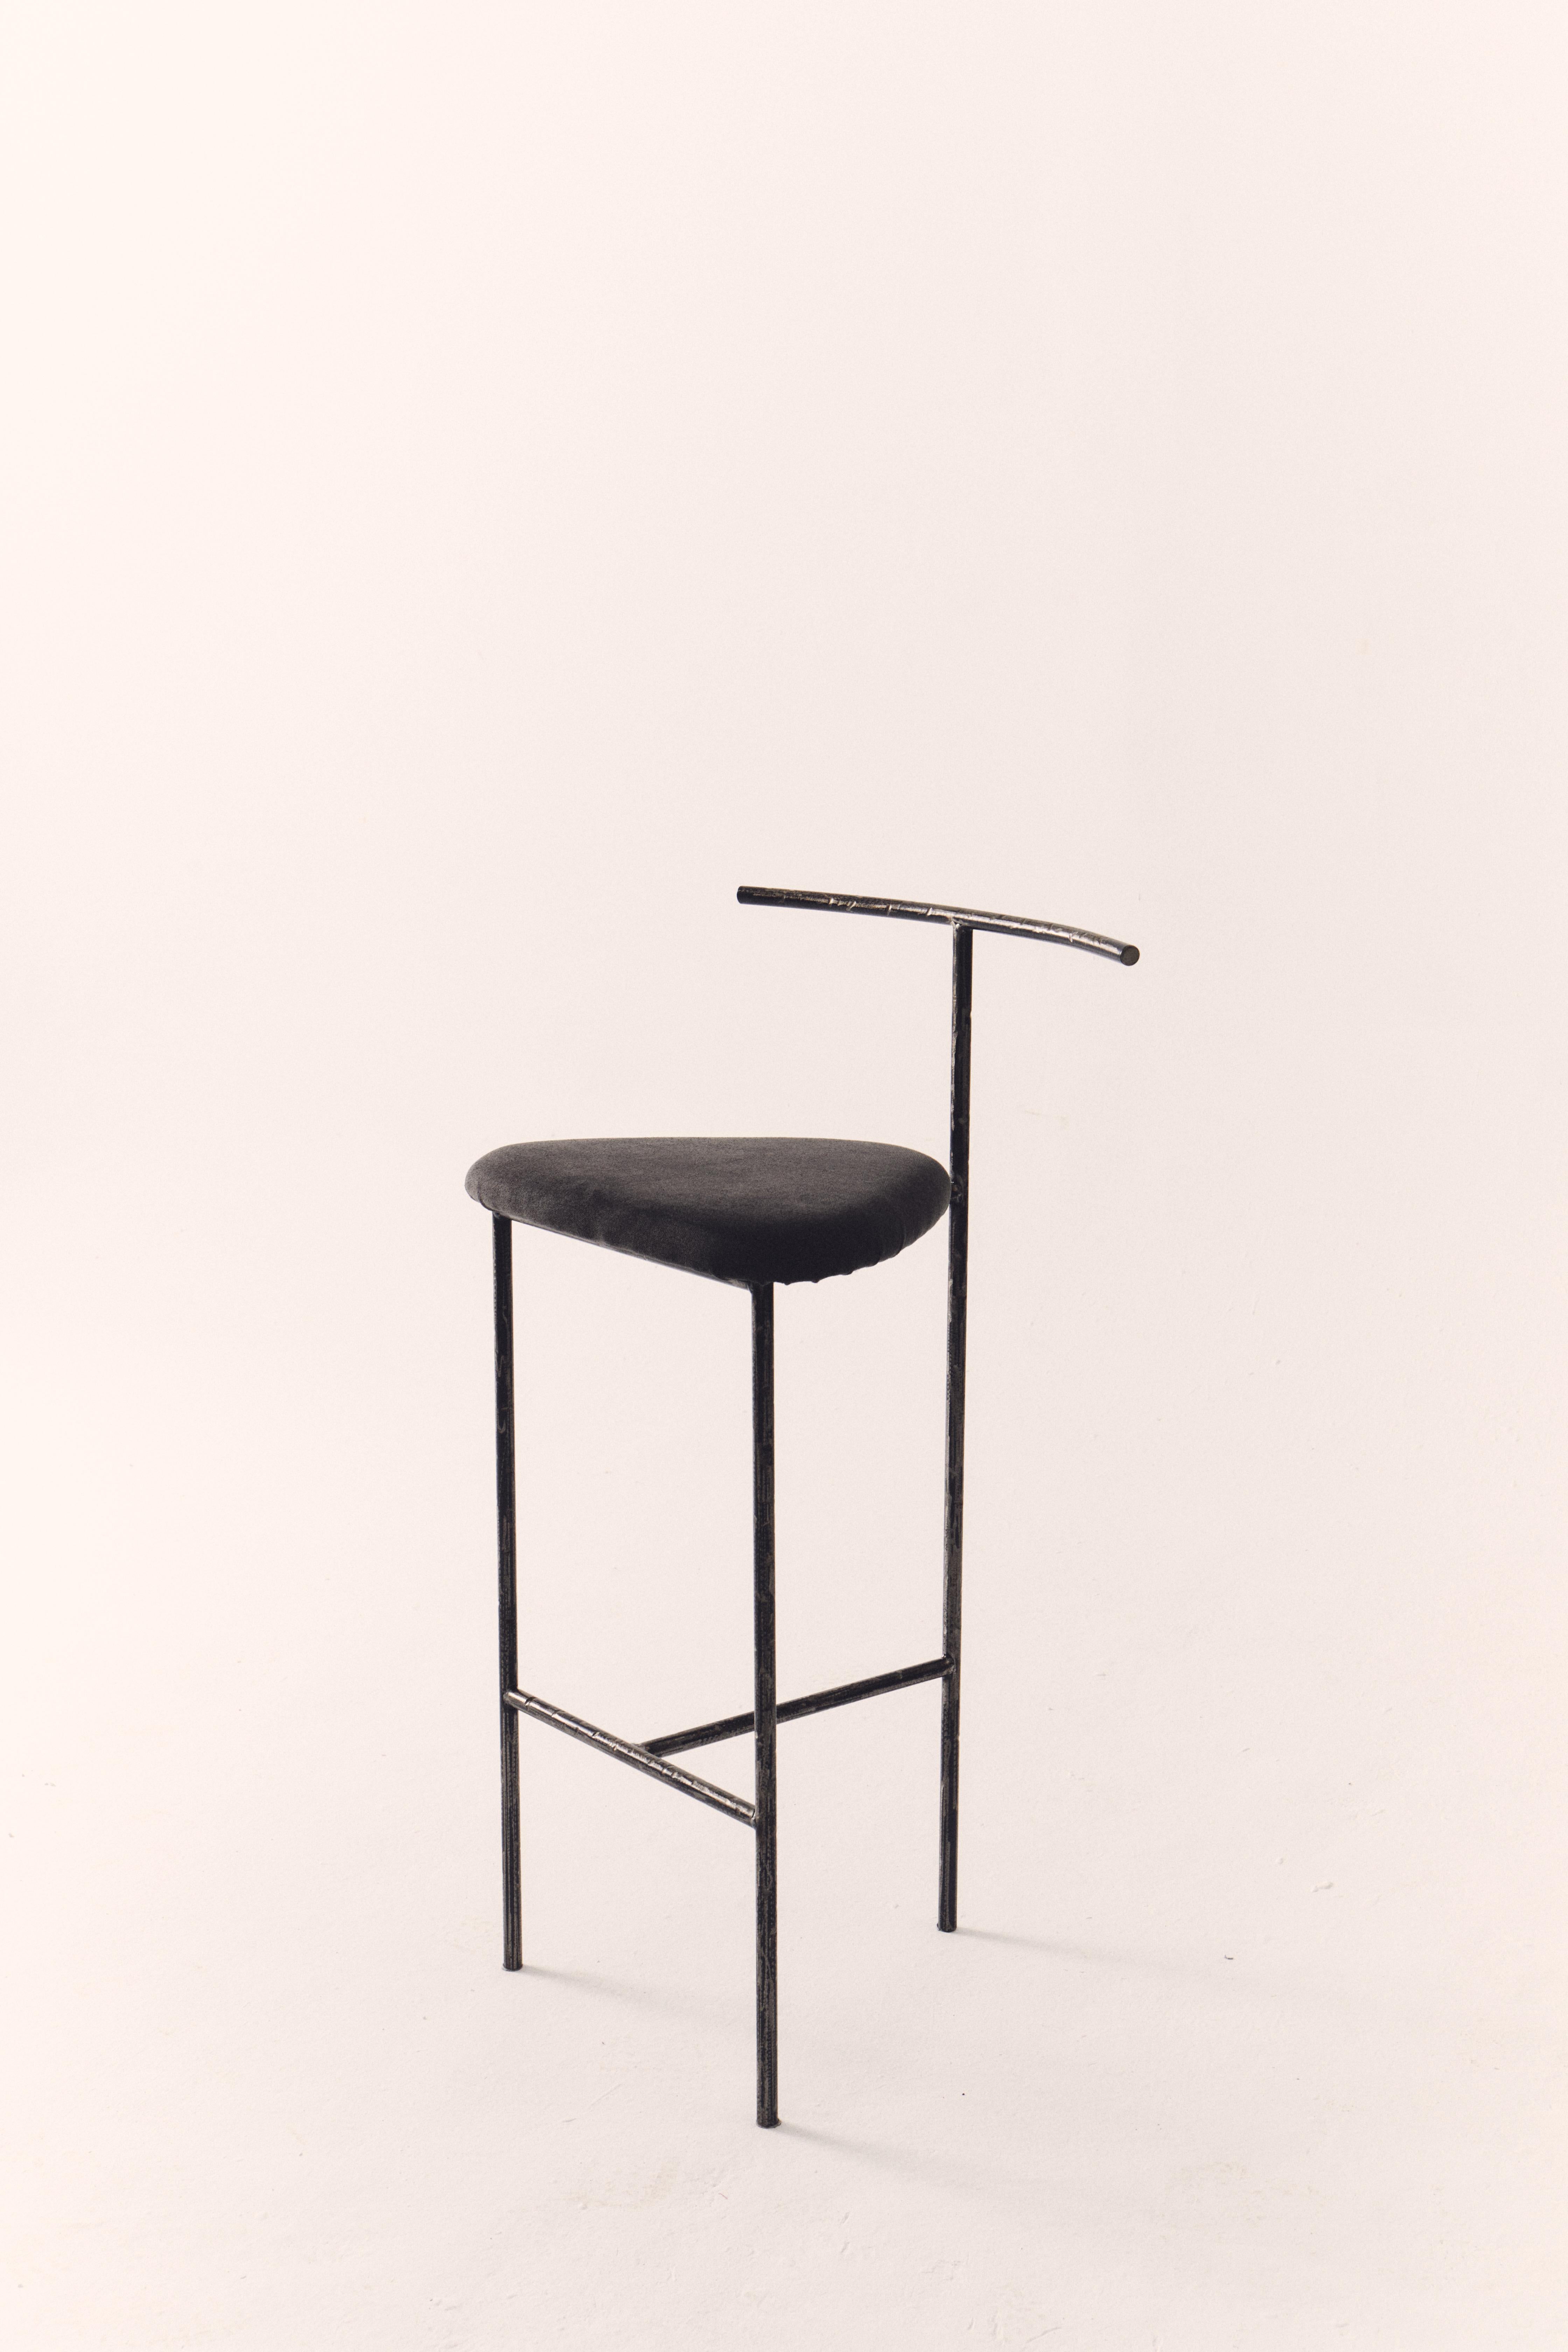 Marco Bar Stool by Dawid Konieczny
Dimensions: D 36 x W 40 x H 88 cm. 
Materials: Black steel and fabric.

Different fabric options on request. Made in Poland. Please contact us. 

Dawid Konieczny Interiors is a design studio founded in 2021 by